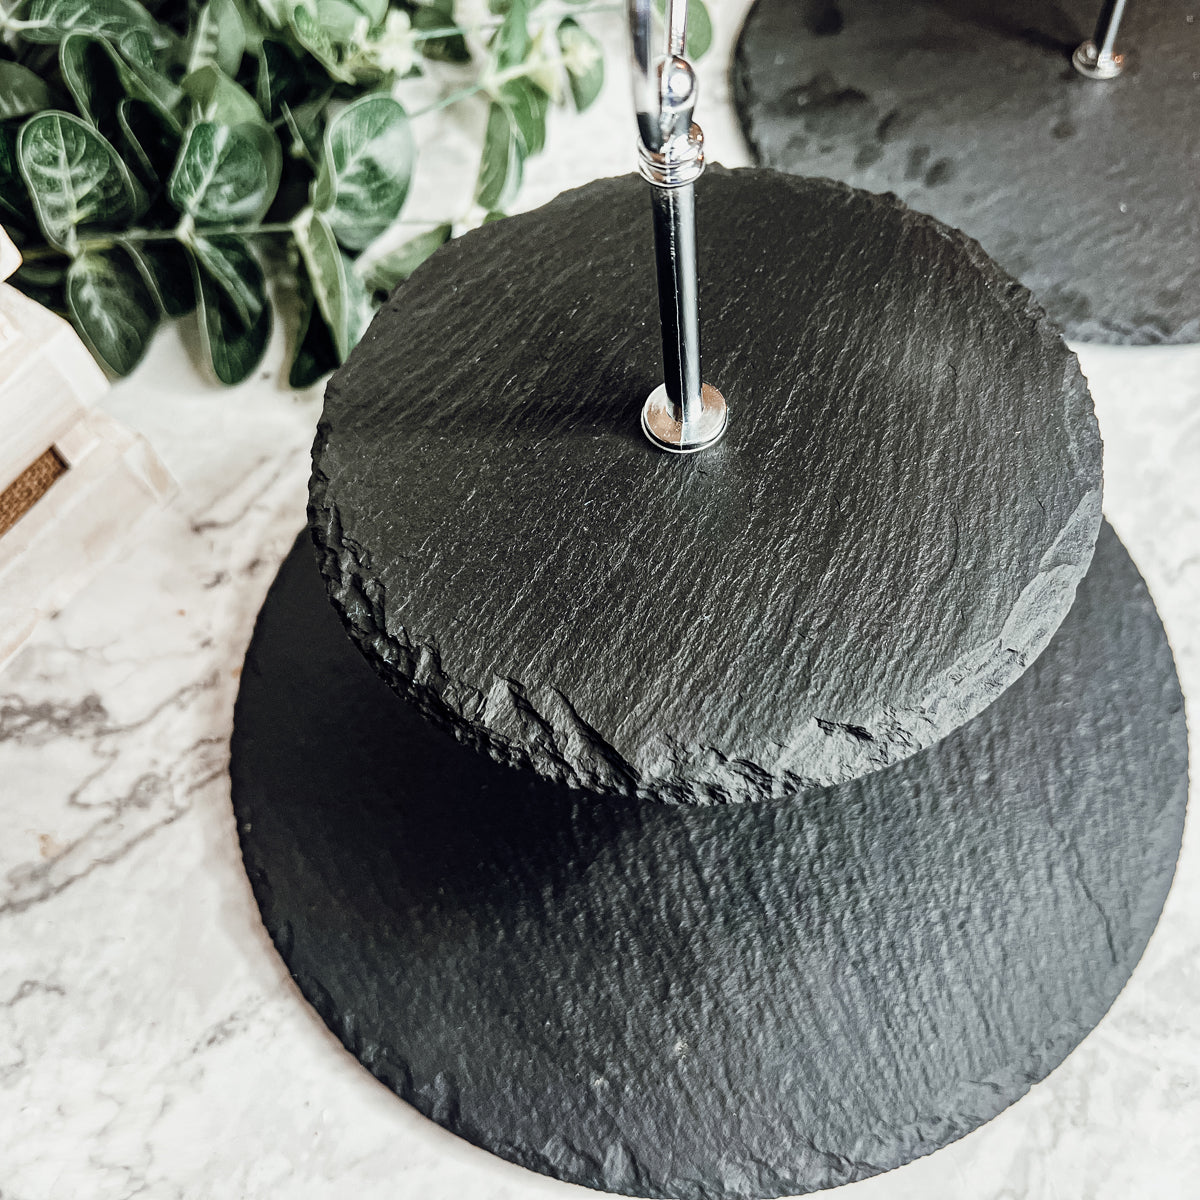 Slate Cake Stands Natural Stone Stands tiered